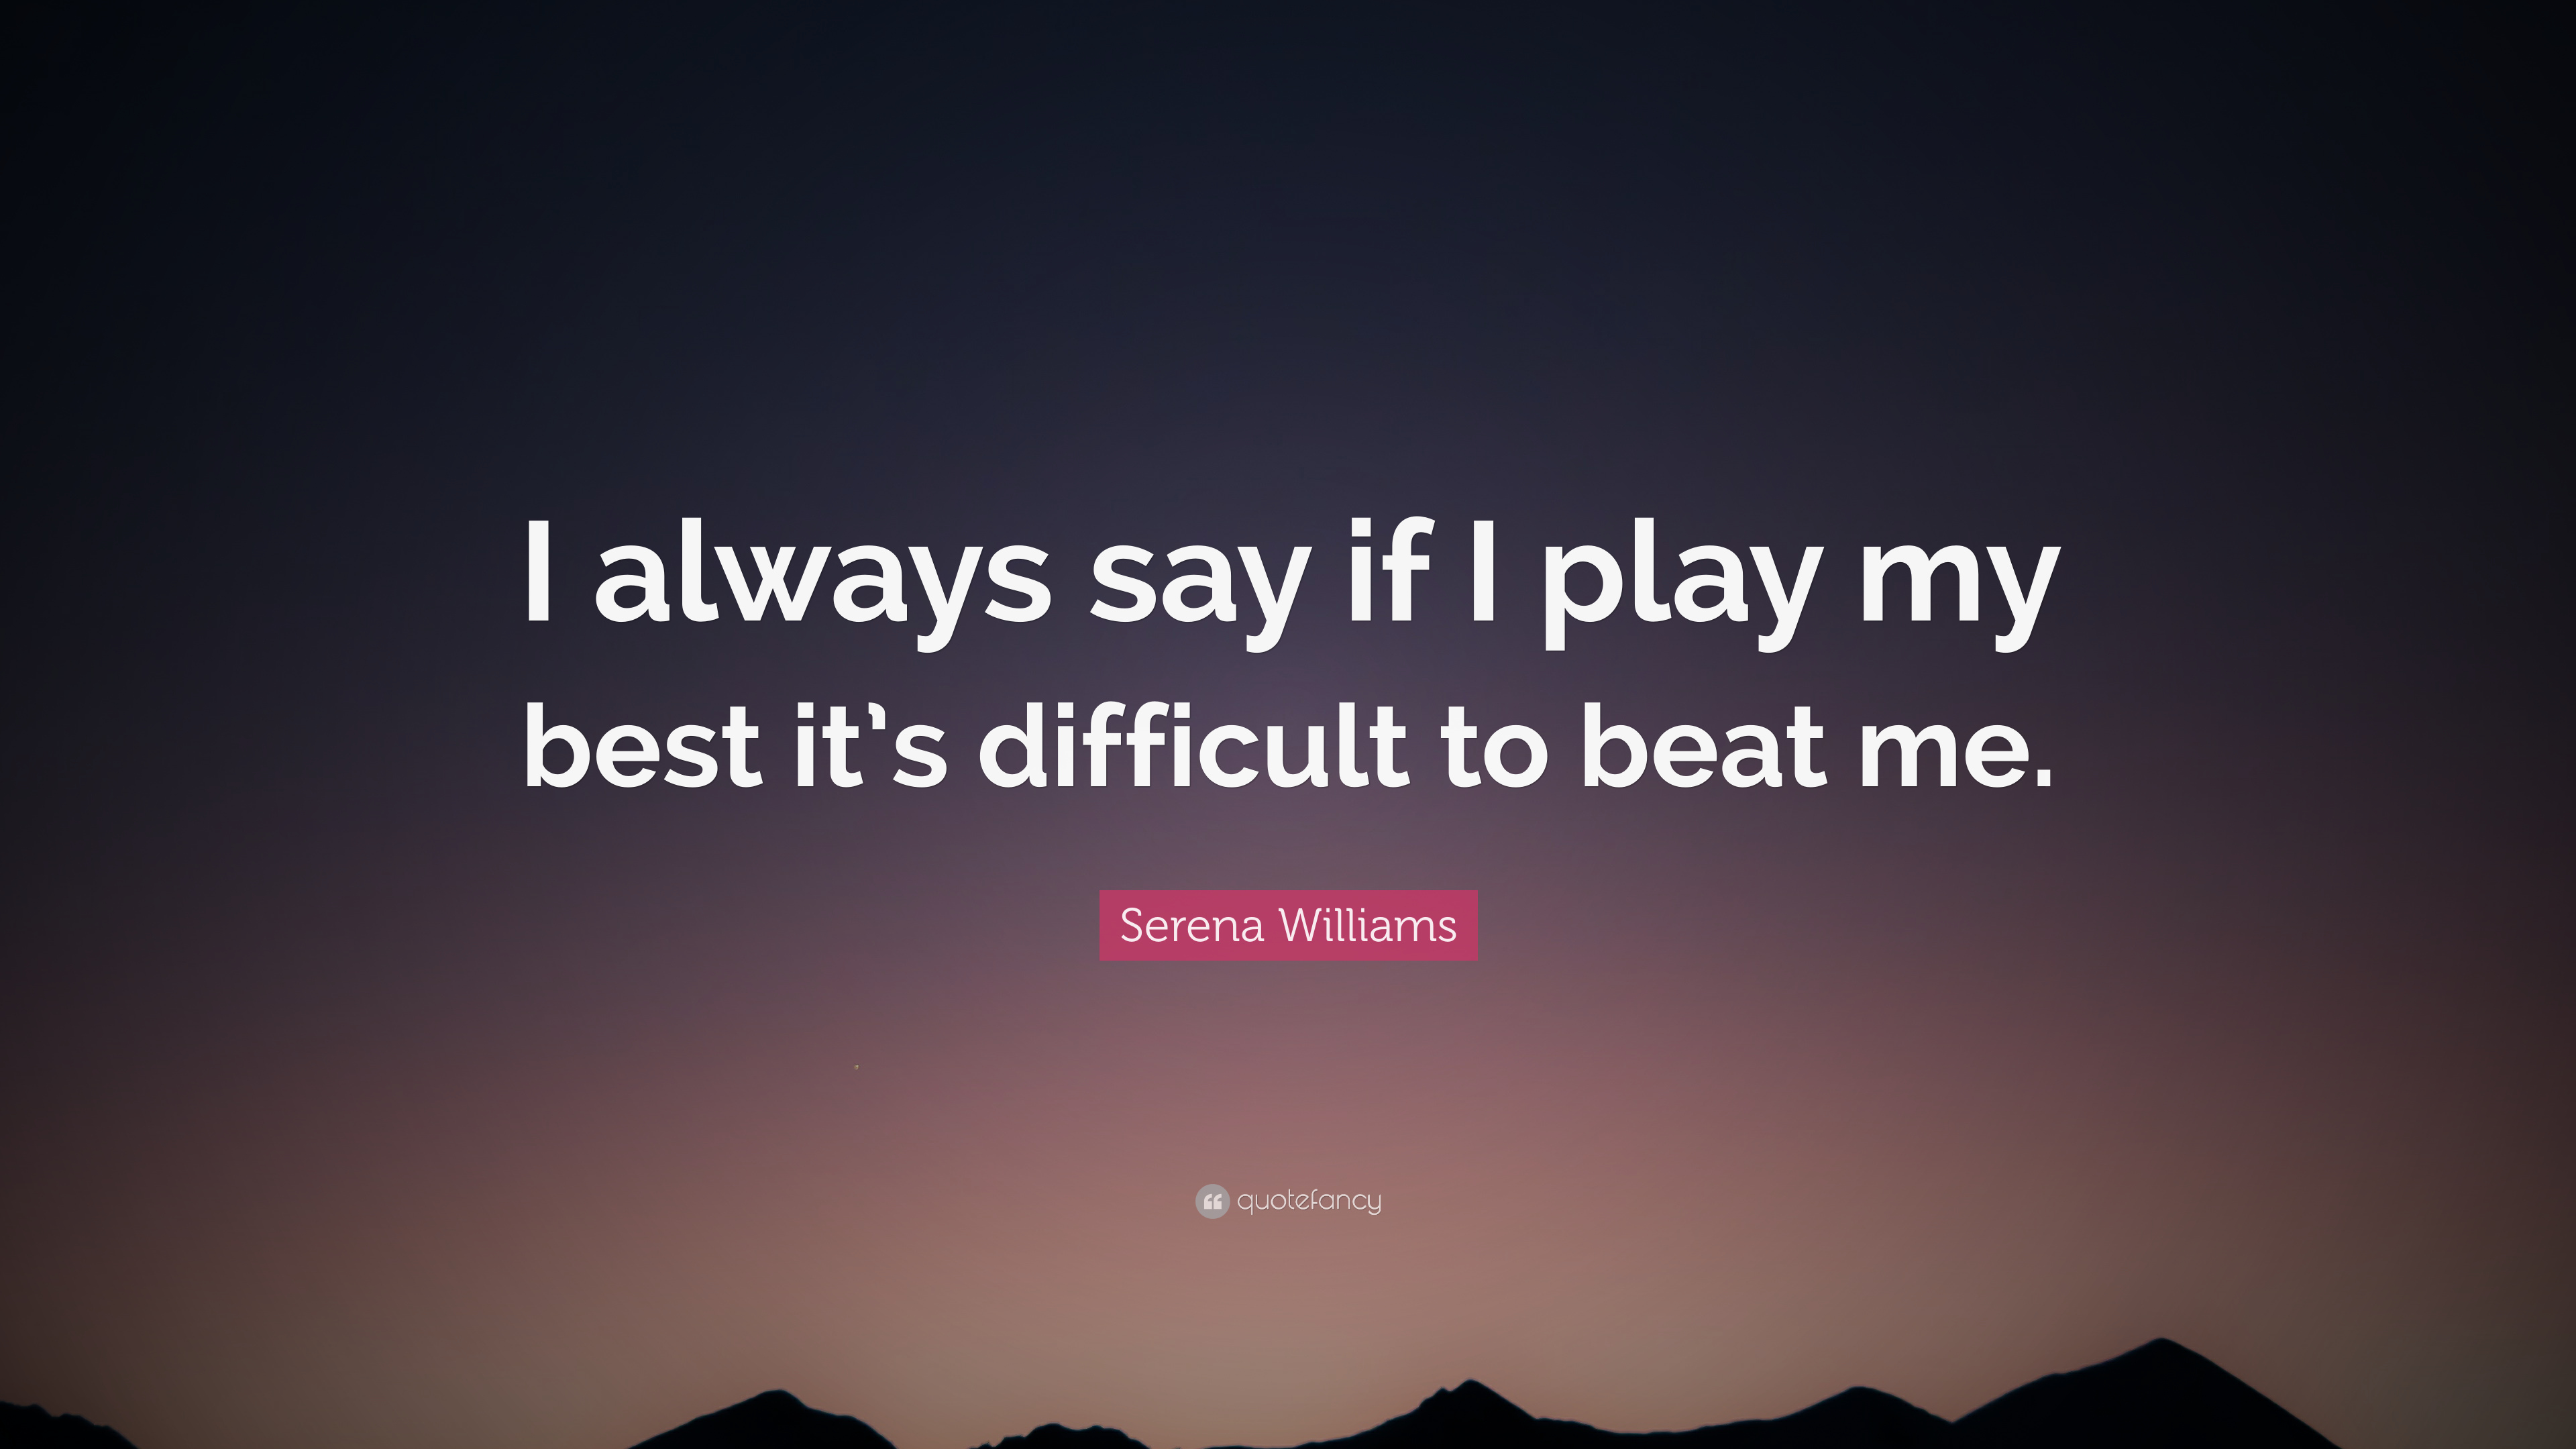 Serena Williams Quote - I M Not Afraid To Die - HD Wallpaper 